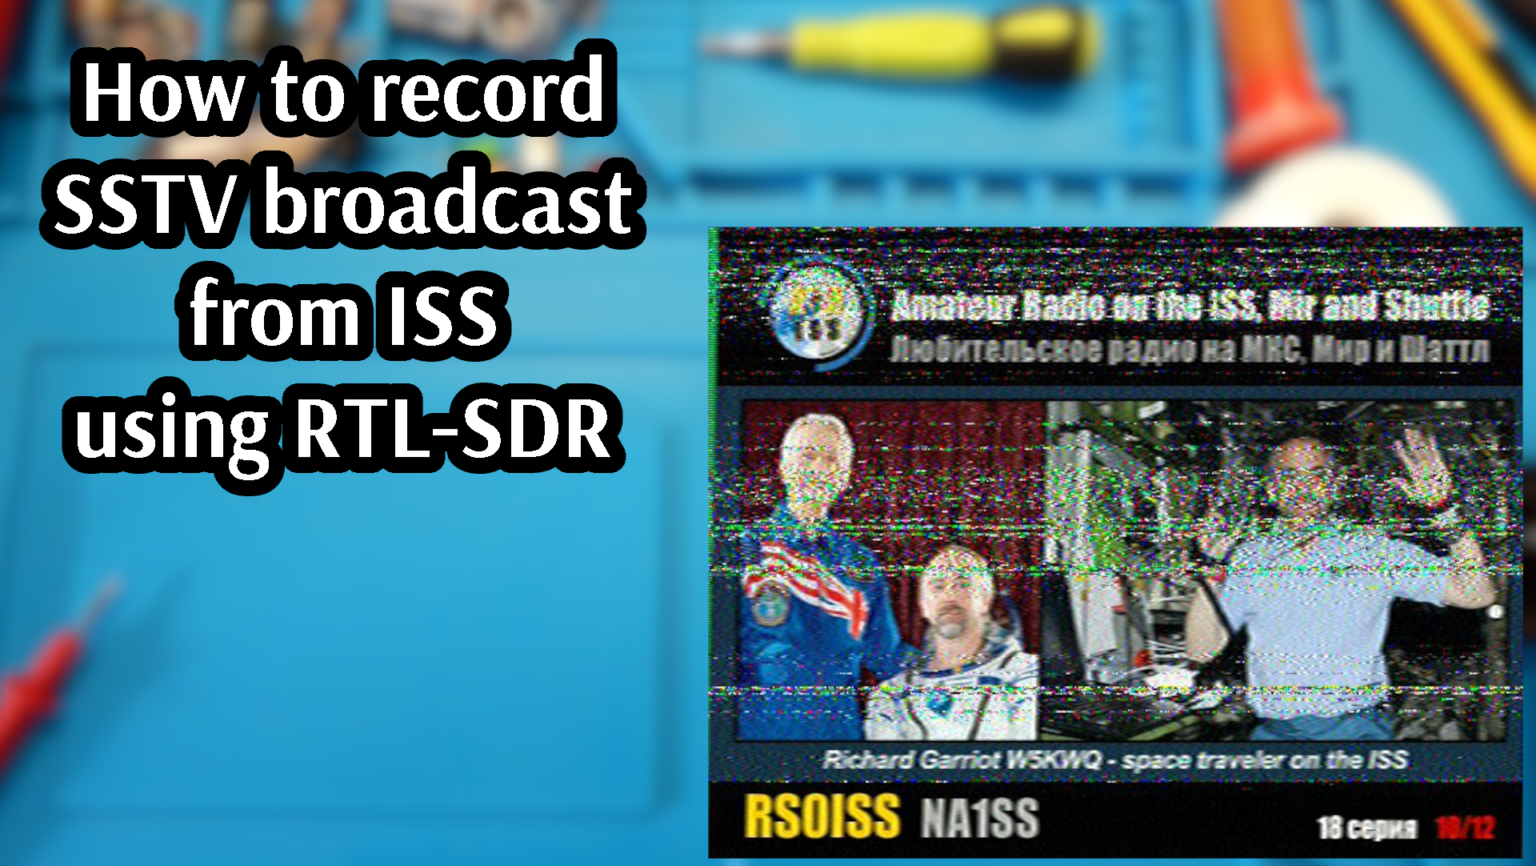 How to record SSTV broadcast from International Space Station using RTL